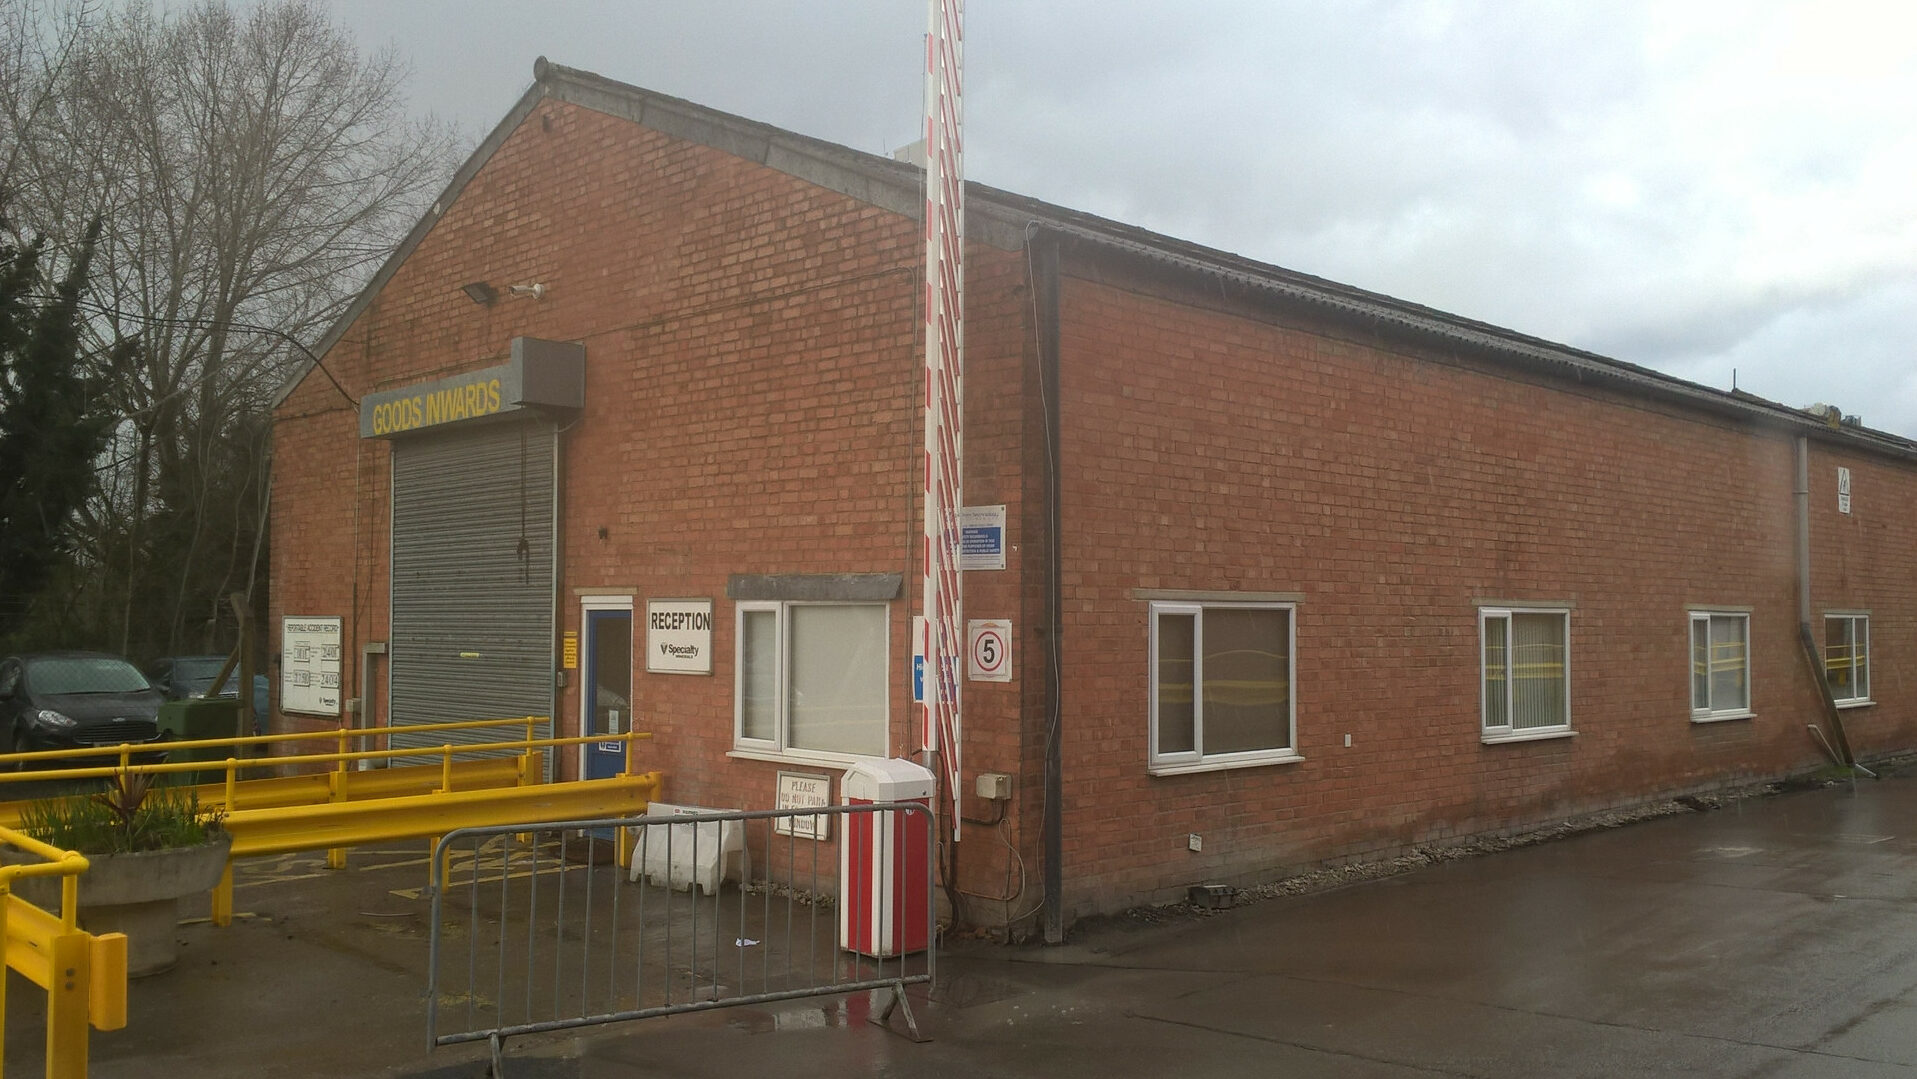 Space saving installation of rising boom barriers on the corner of a warehouse